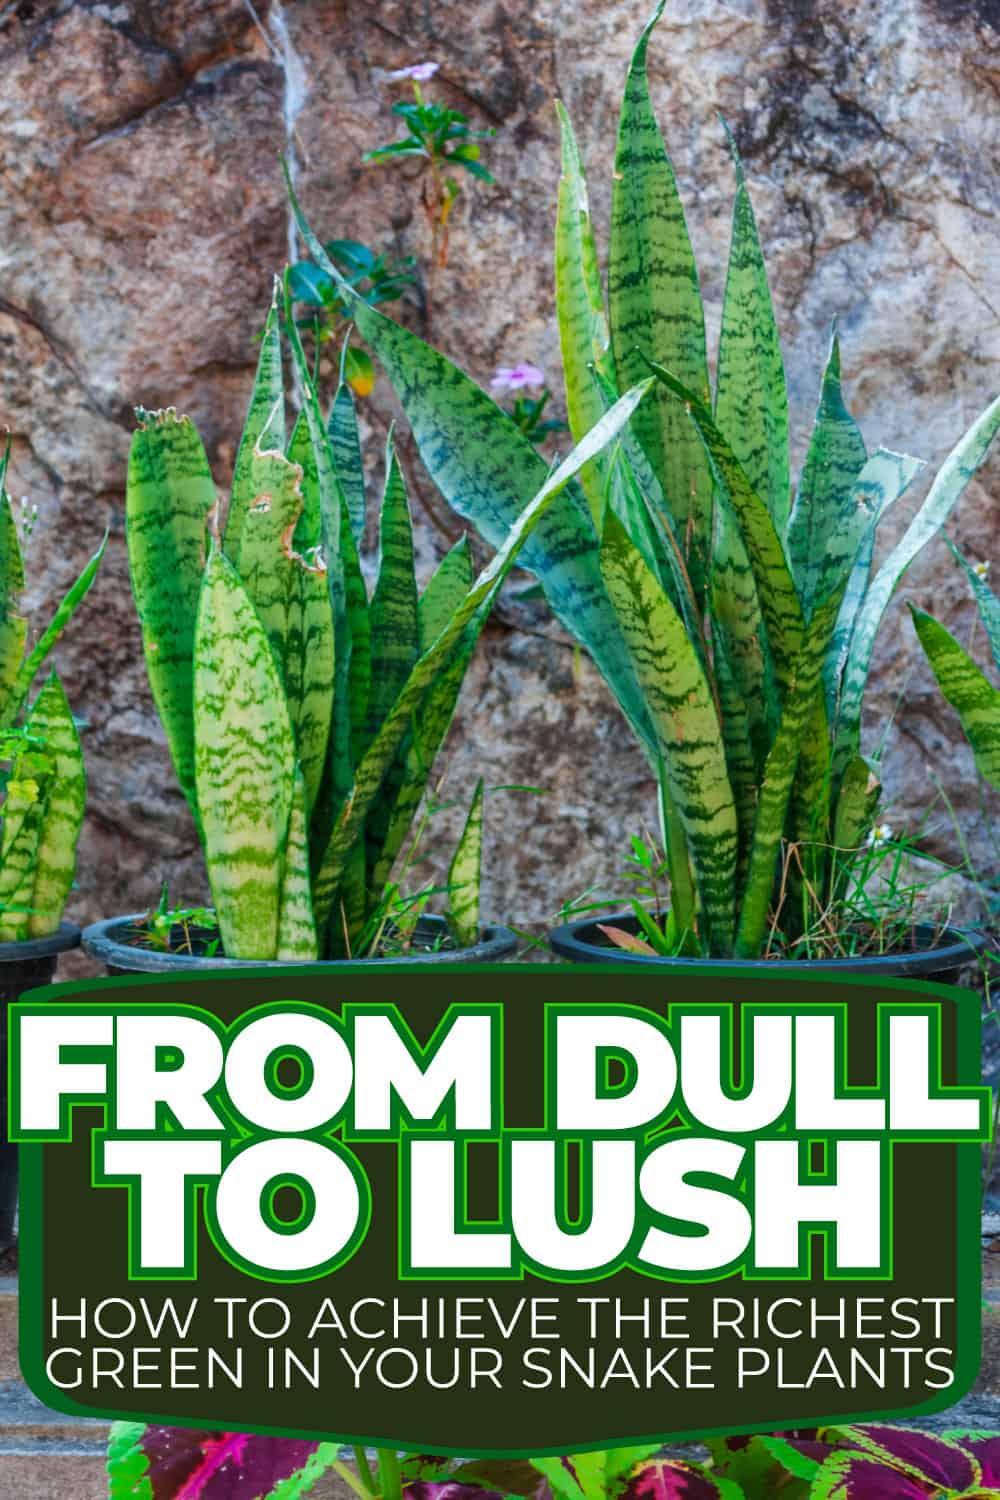 From Dull To Lush: How To Achieve The Richest Green In Your Snake Plants